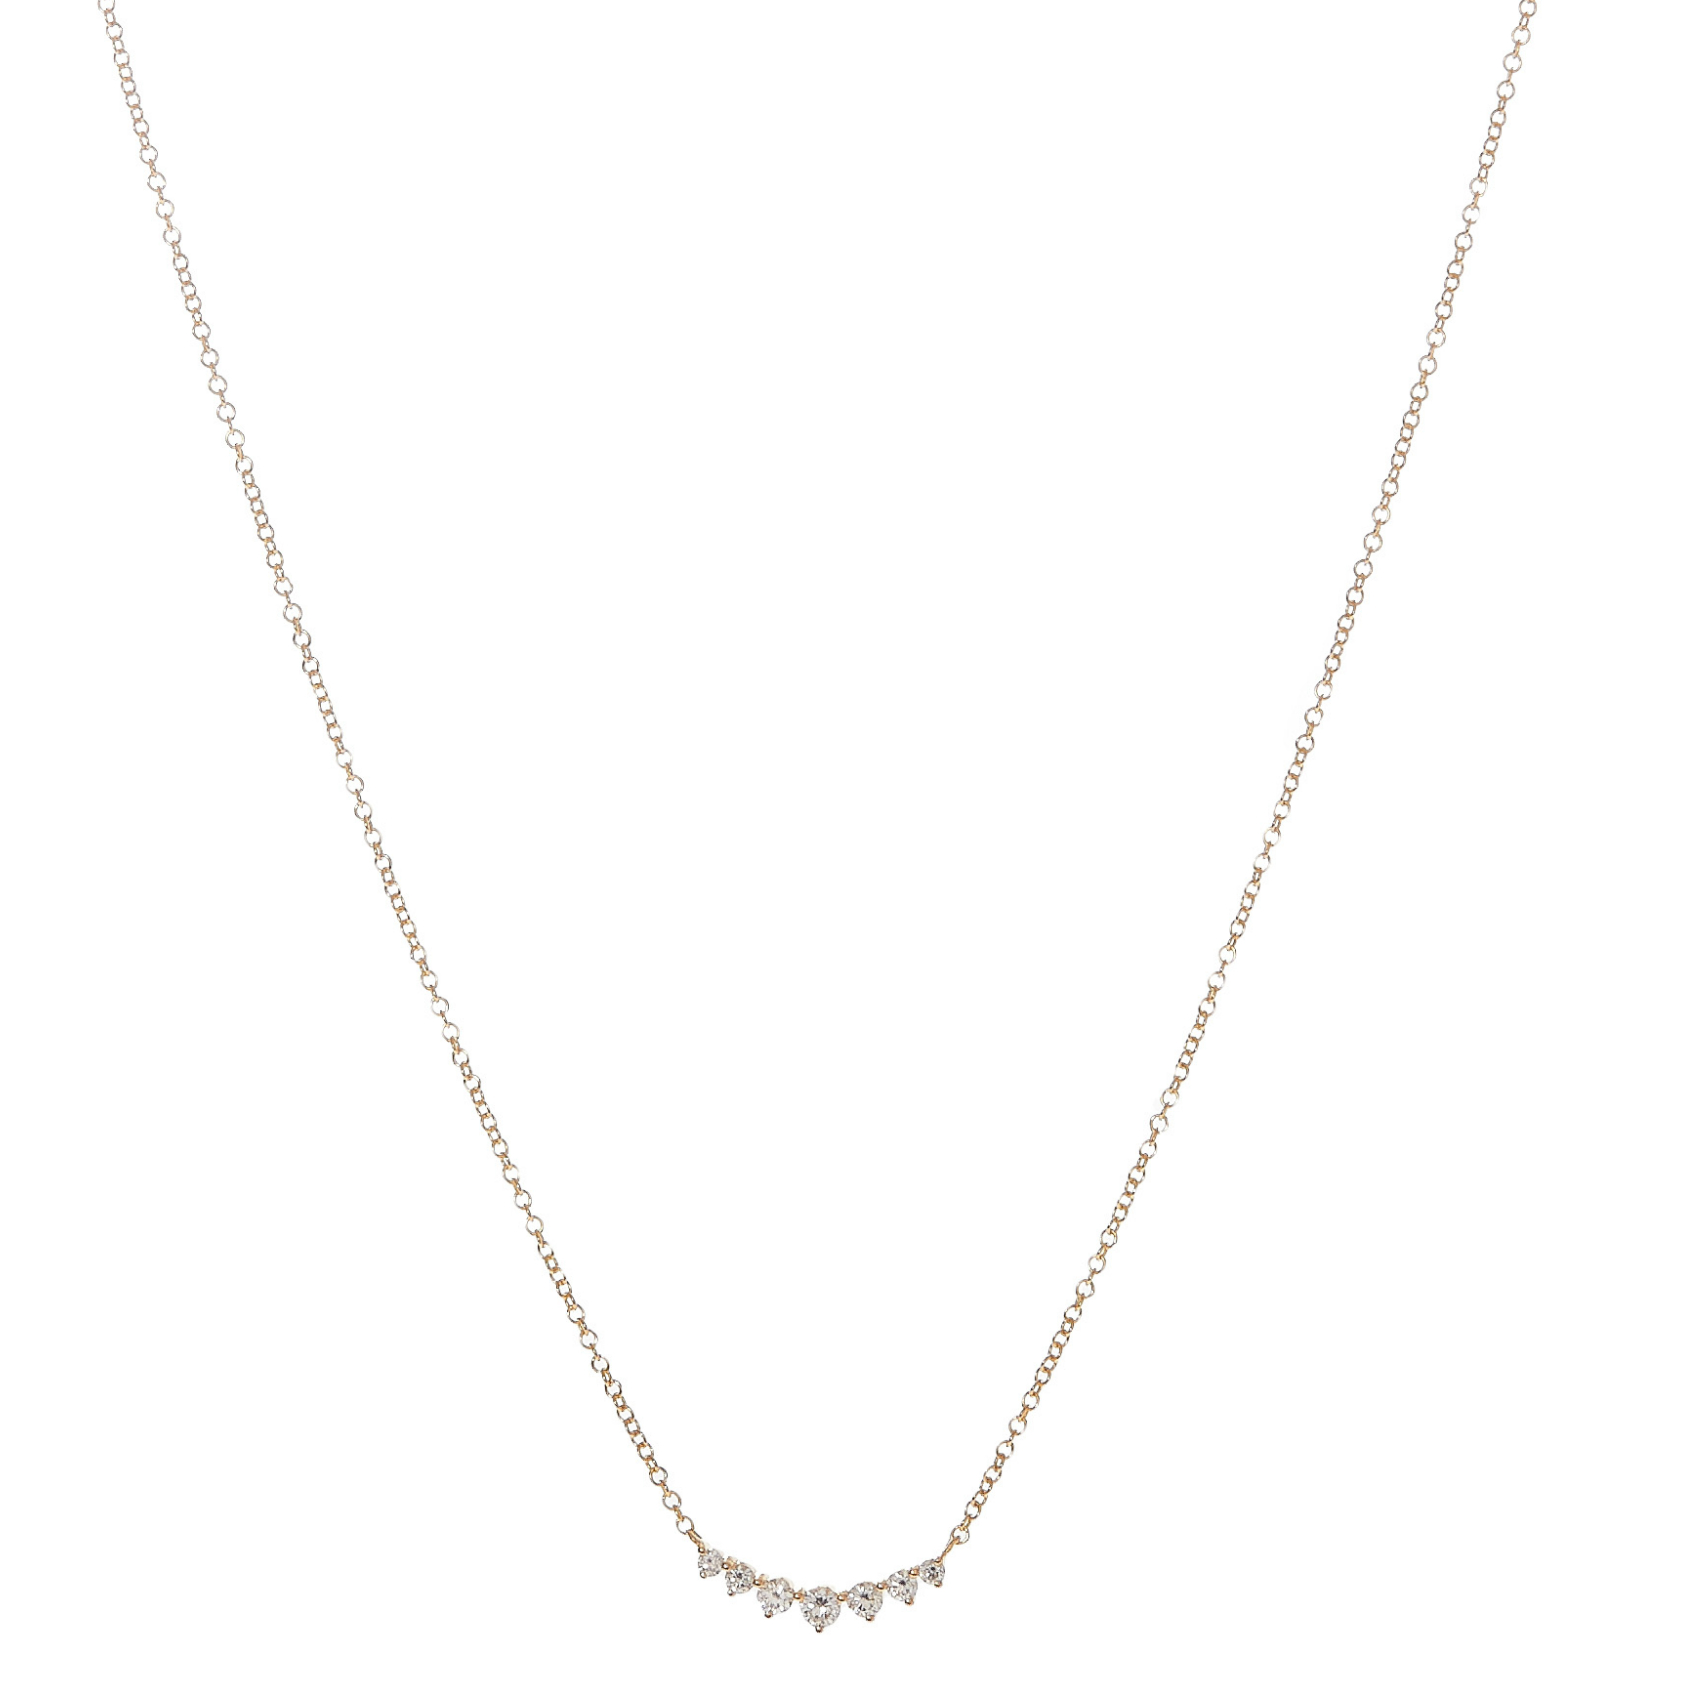 Skinny Curve Necklace in 18k Rose Gold Vermeil On Sterling Silver and  Diamond | Jewellery by Monica Vinader